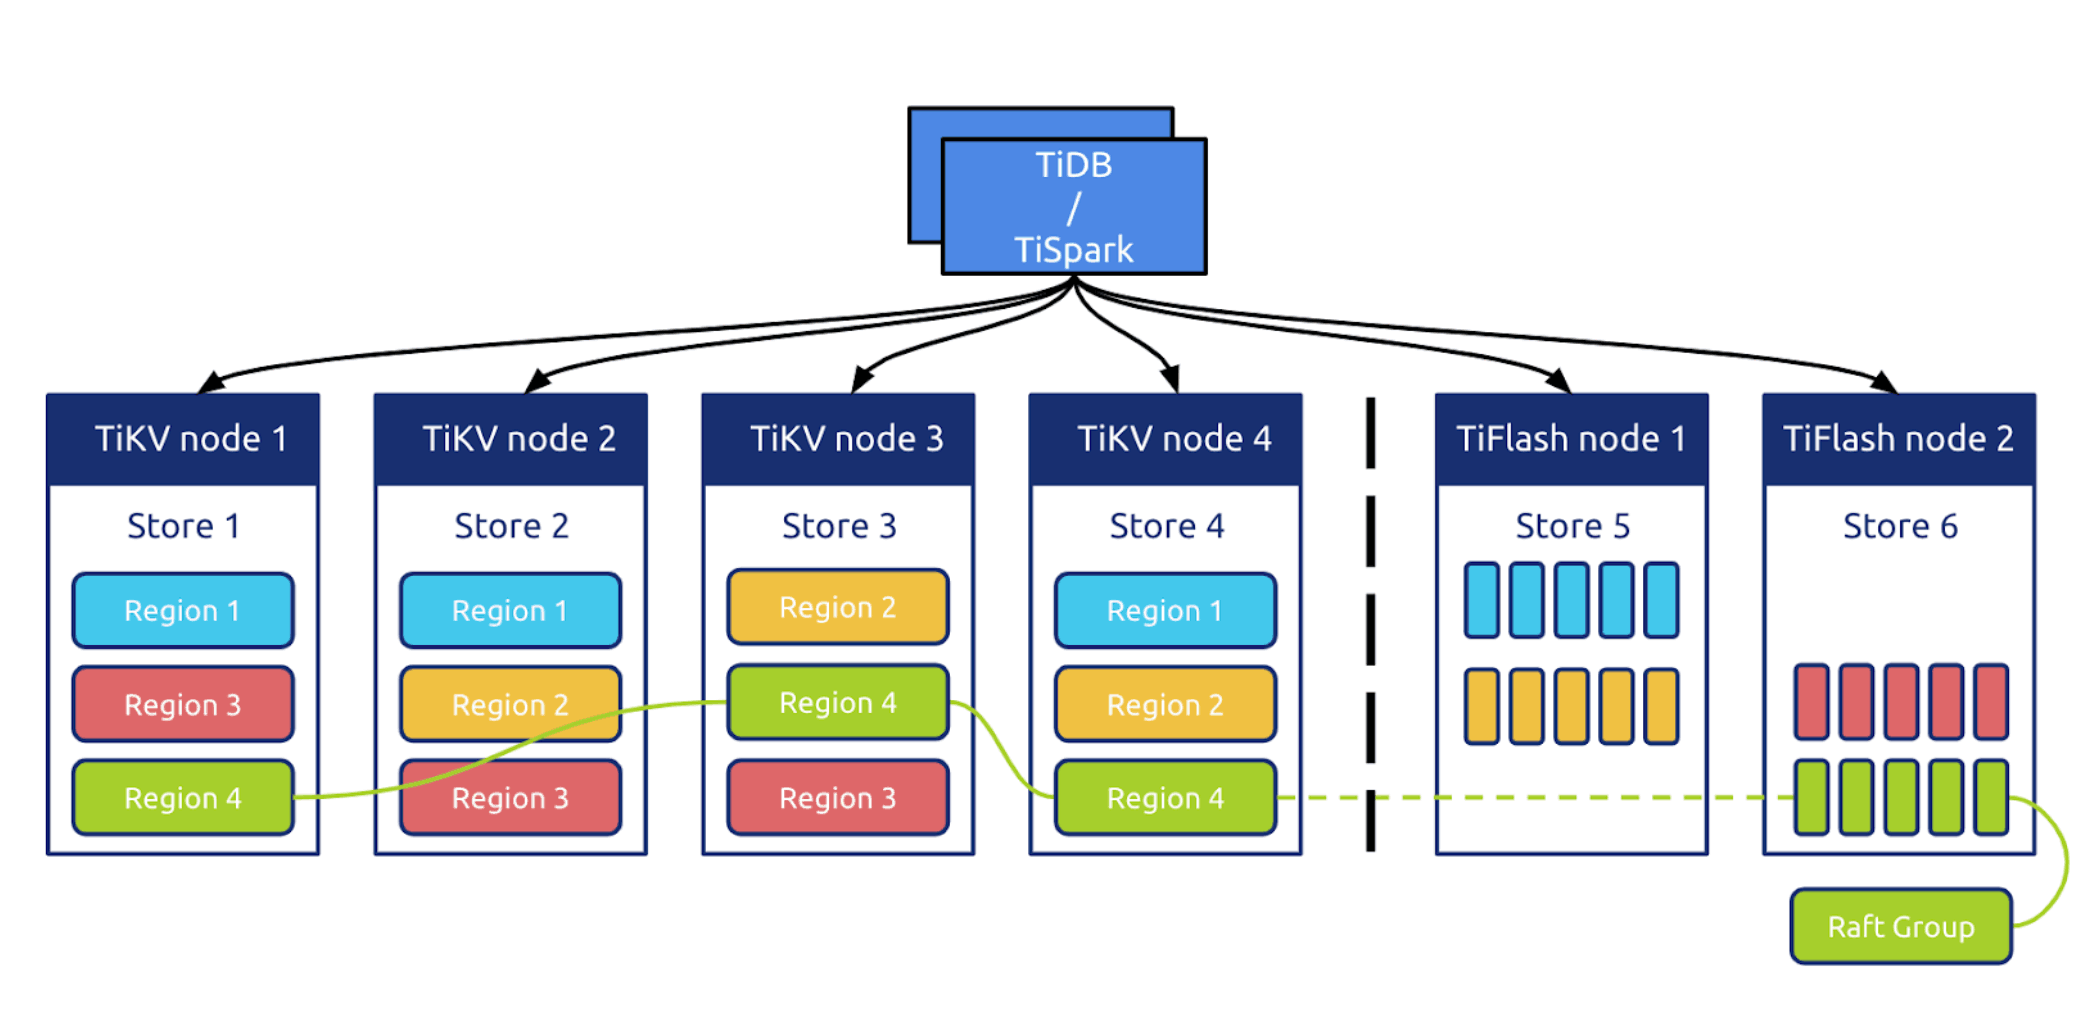 TiDB in the HTAP architecture with TiFlash nodes